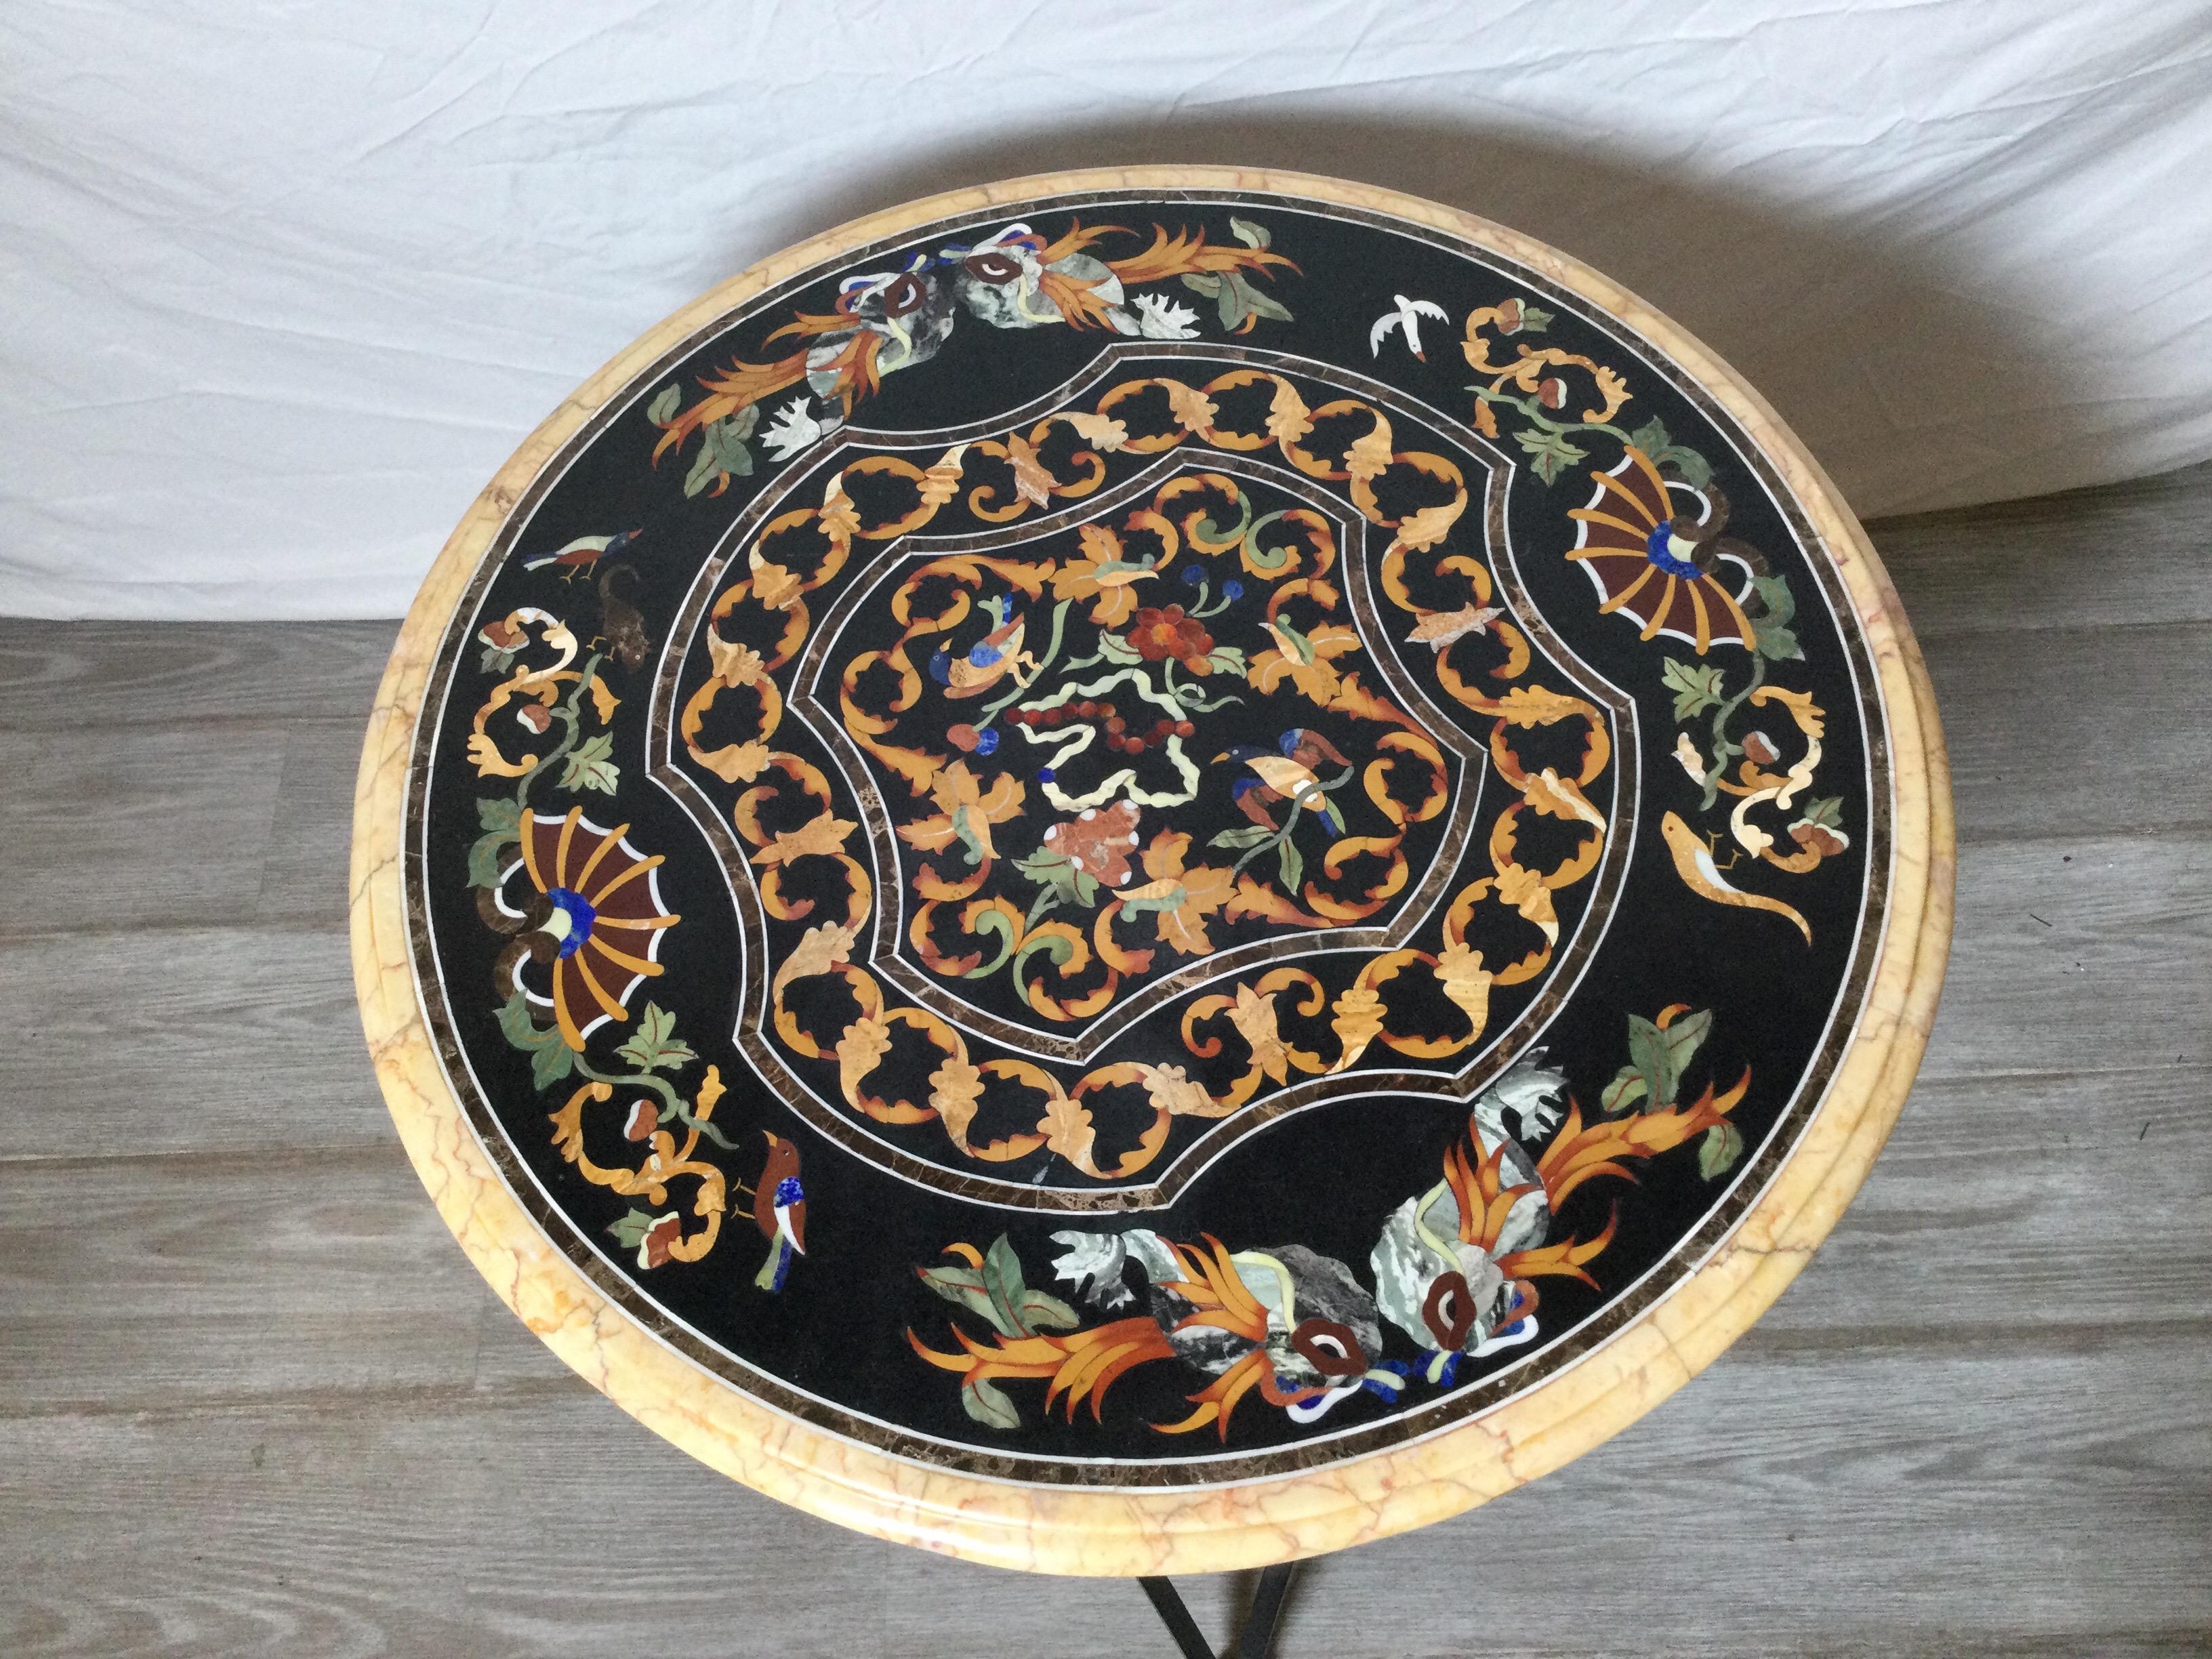 Vibrant pietra dura table with blackened iron base. The beautifully inlaid top with lapis, malachite and other colorful stones on a slate background. The bleck iron base with brass accented rosettes.